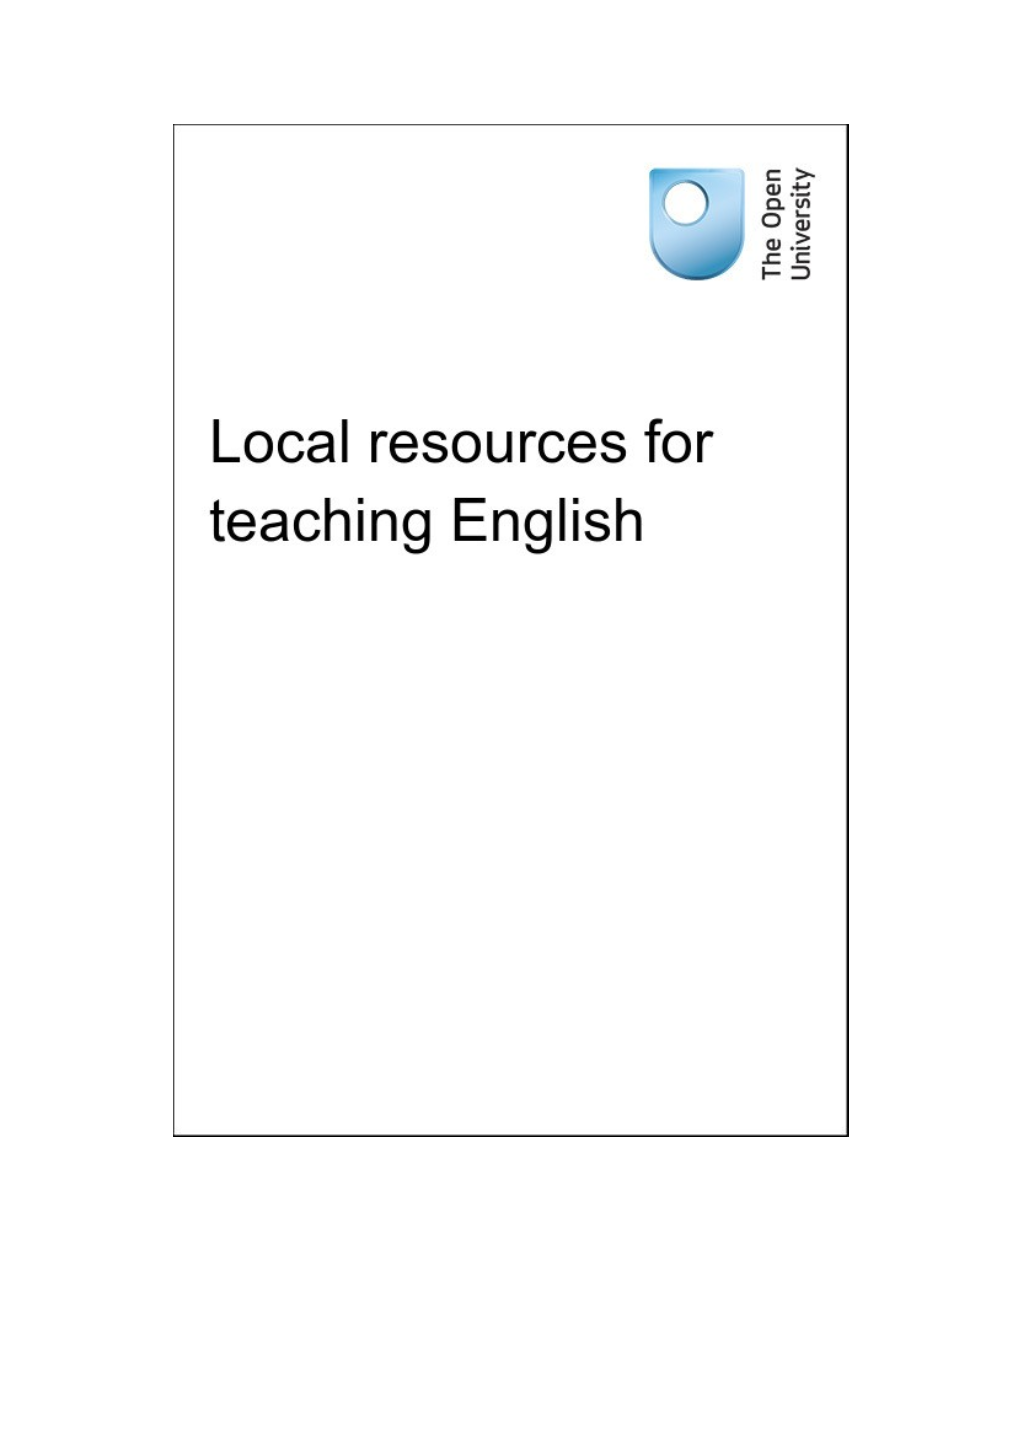 Local Resources for Teaching English